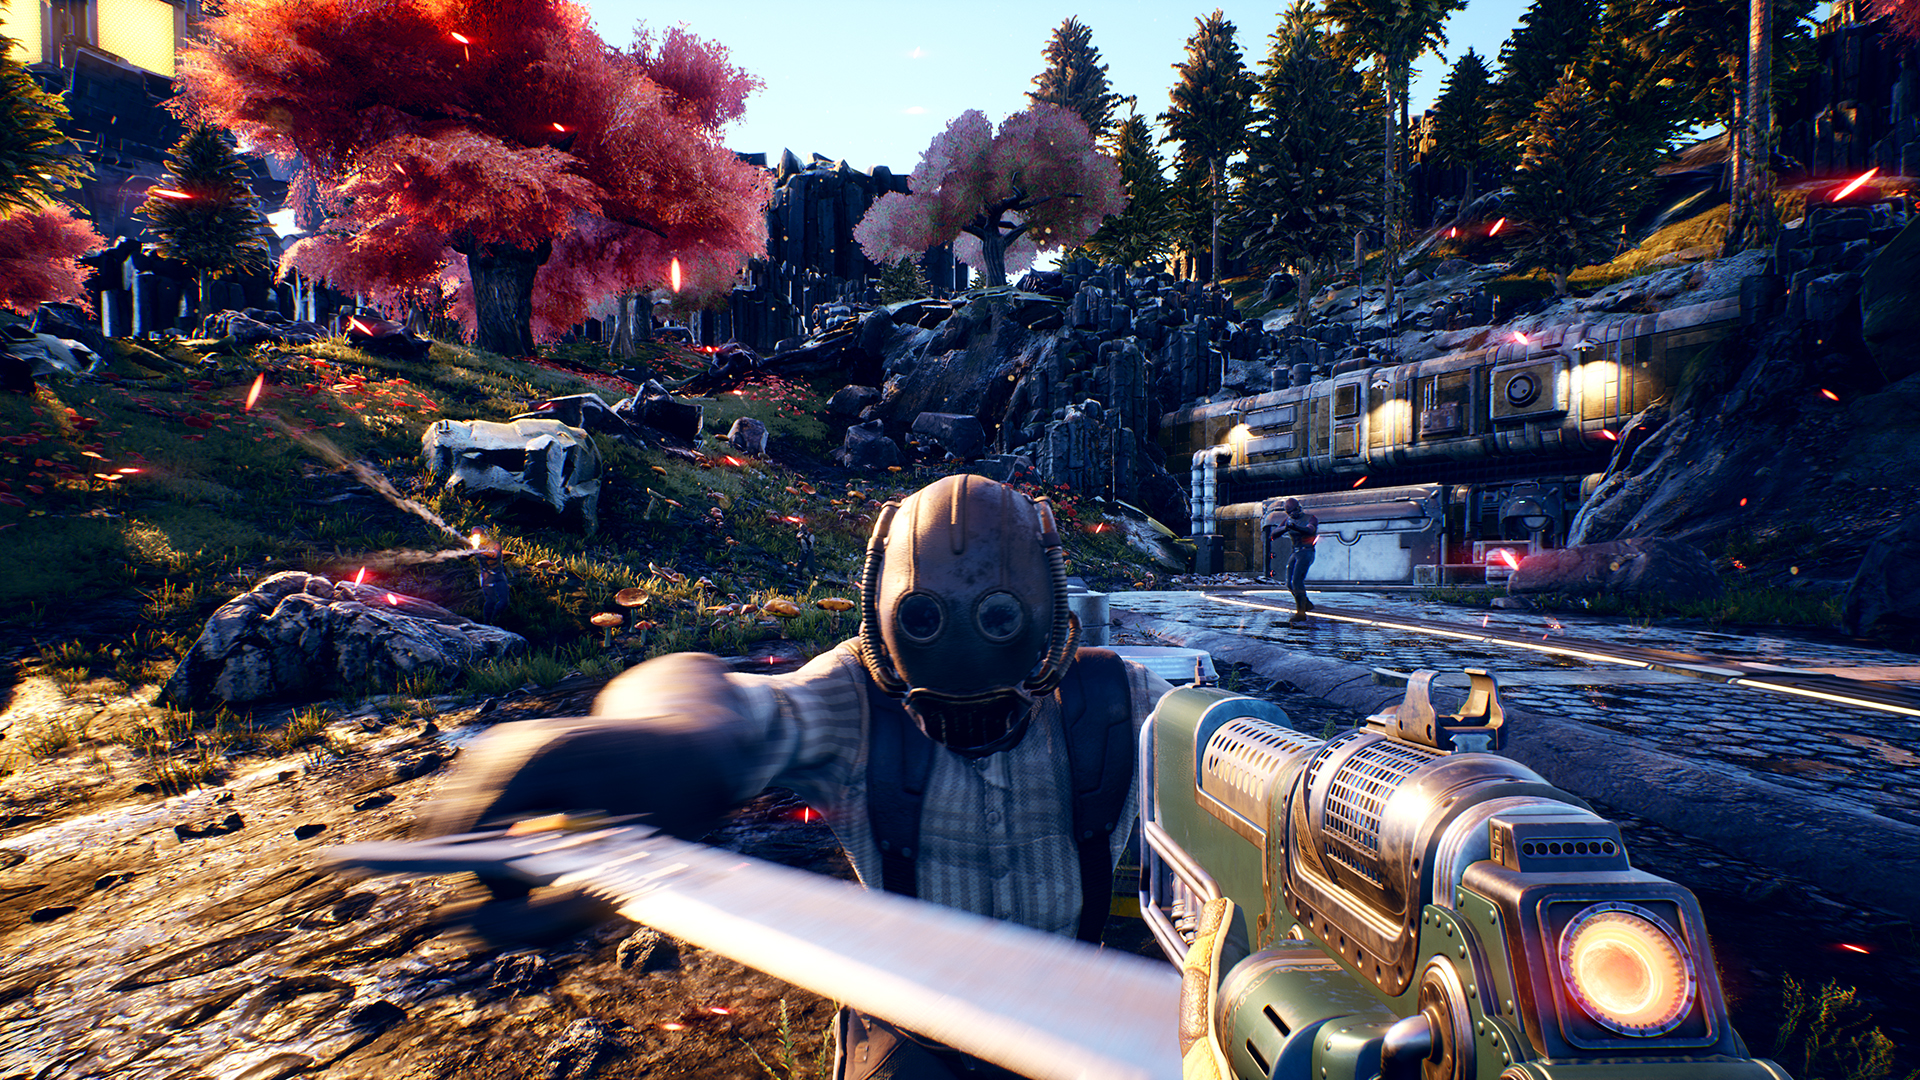 The Outer Worlds 発売日が10月25日に決定 Fallout New Vegas Pillars Of Eternity 開発元が手がけるsfrpg Automaton